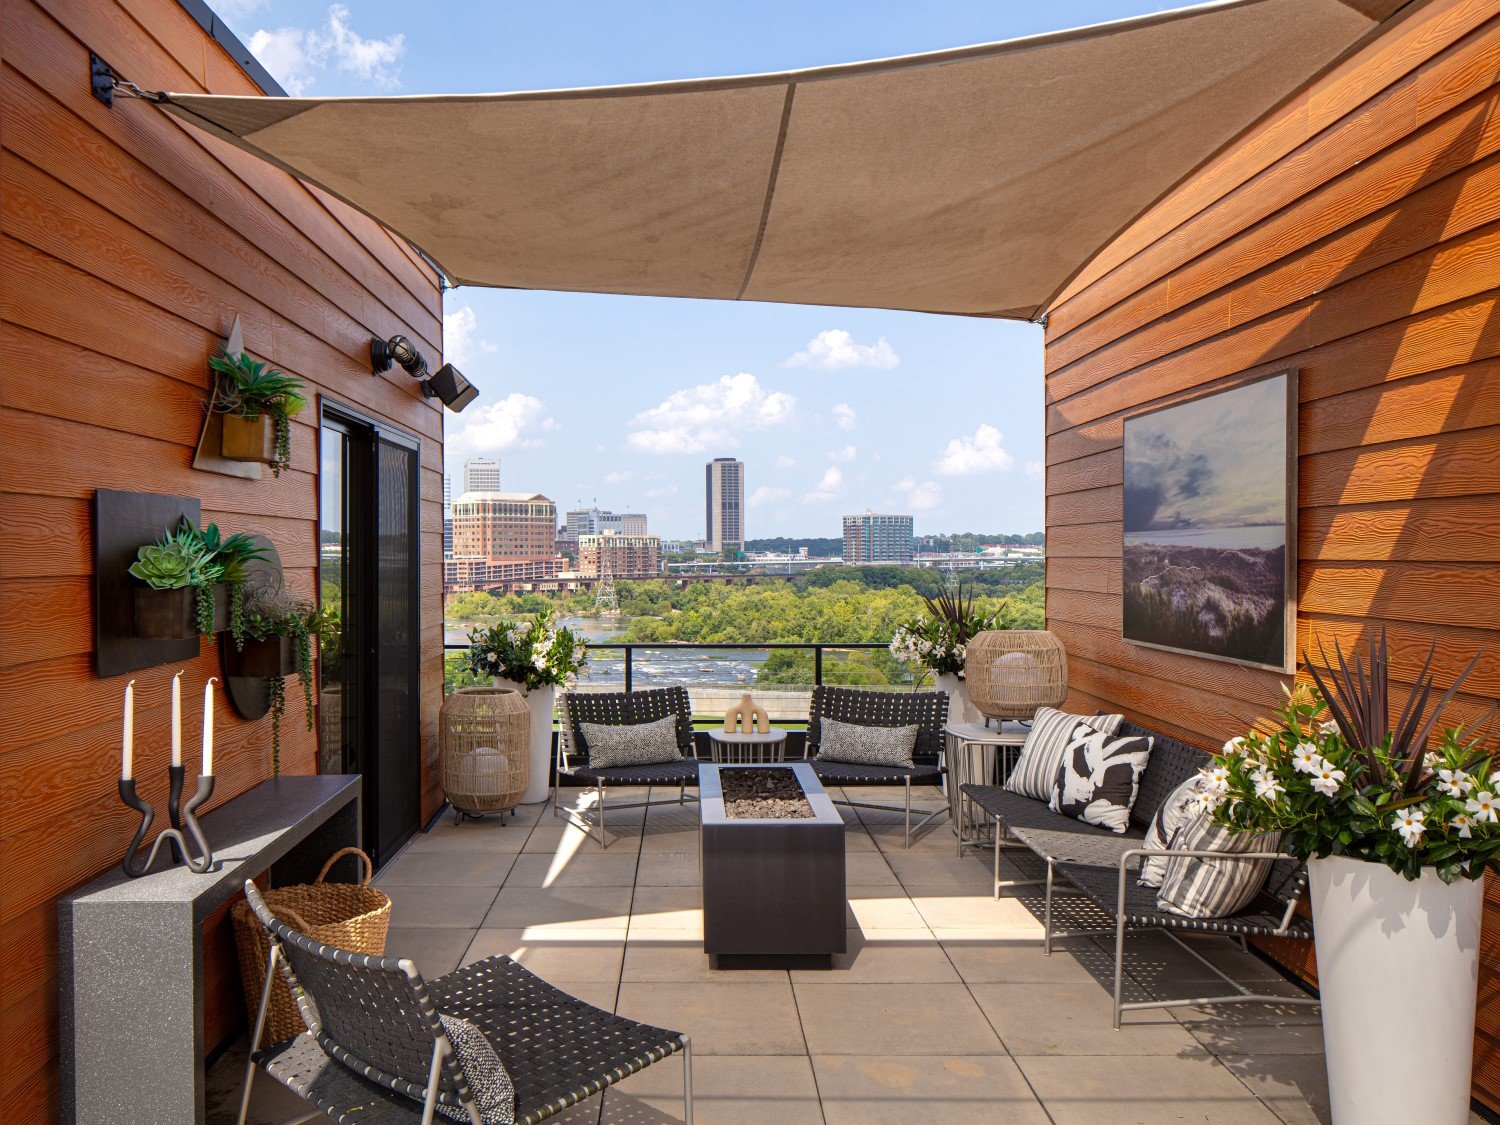  Rooftop living with a spectacular view! We created a chic outdoor space with wall-mounted and standing planters, accessories and furniture in muted tone to not compete with that skyline. 